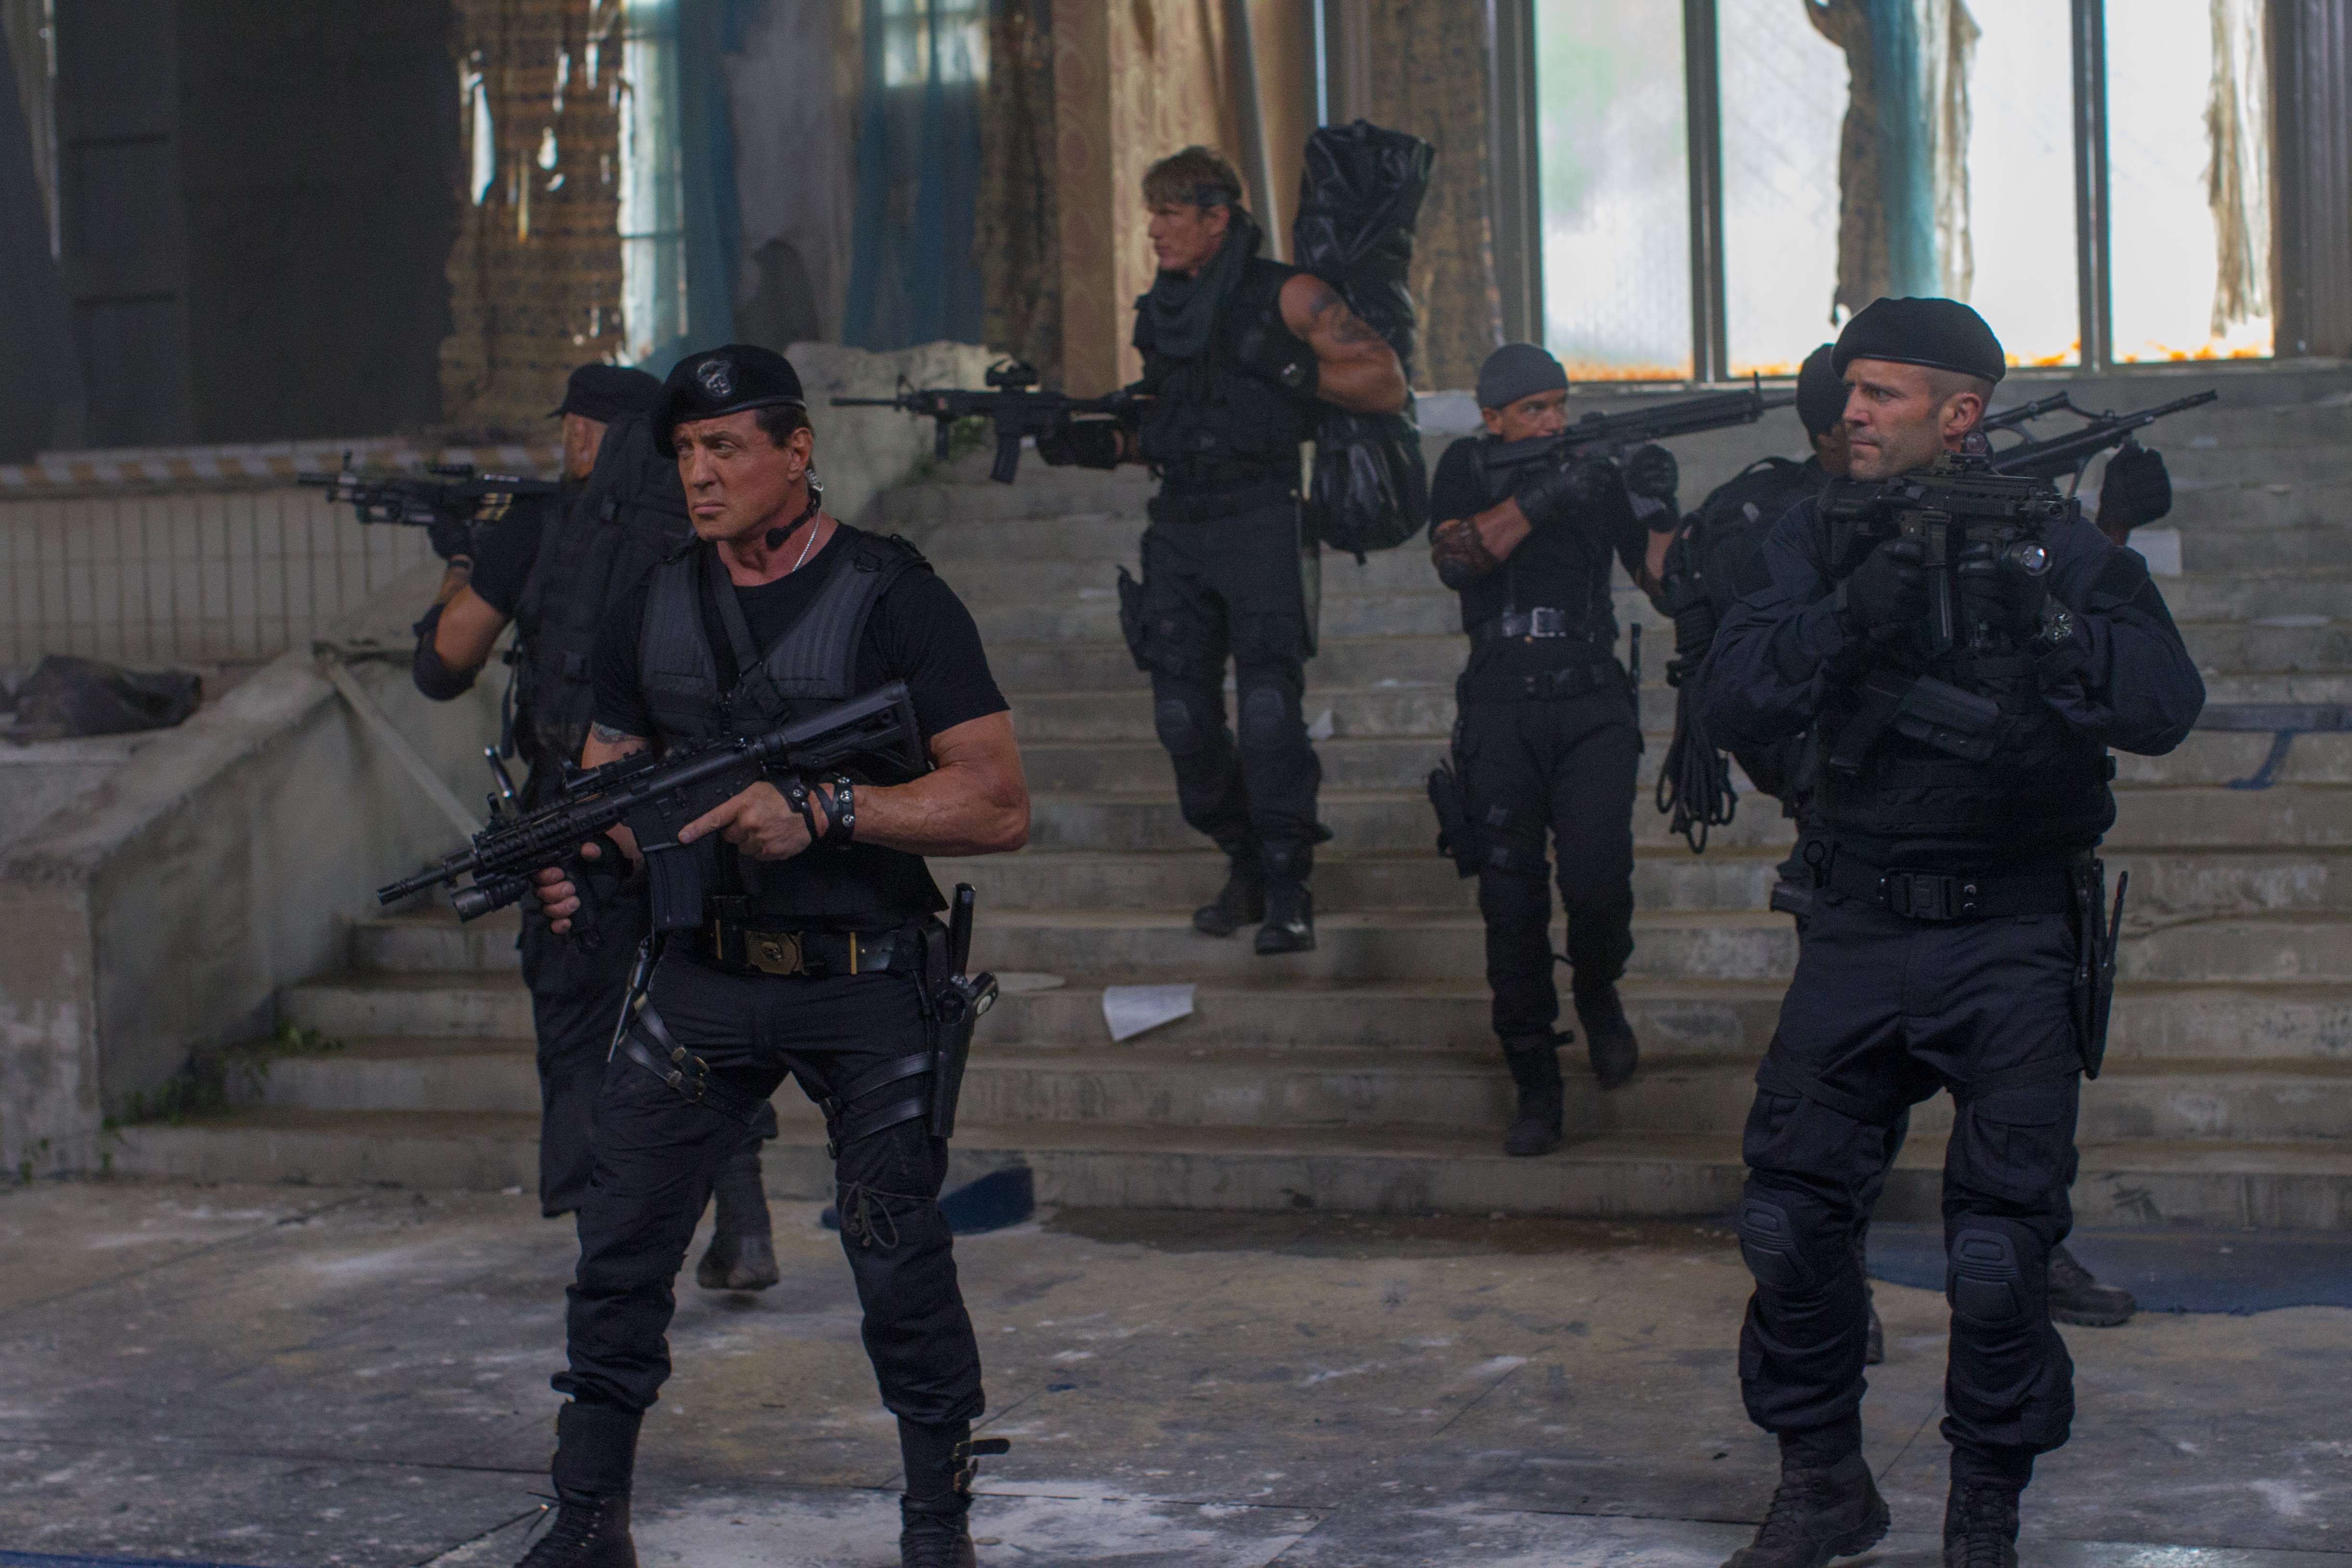 movie, the expendables 3, antonio banderas, barney ross, dolph lundgren, galgo (the expendables), gunnar jensen, jason statham, lee christmas, sylvester stallone, the expendables Full HD